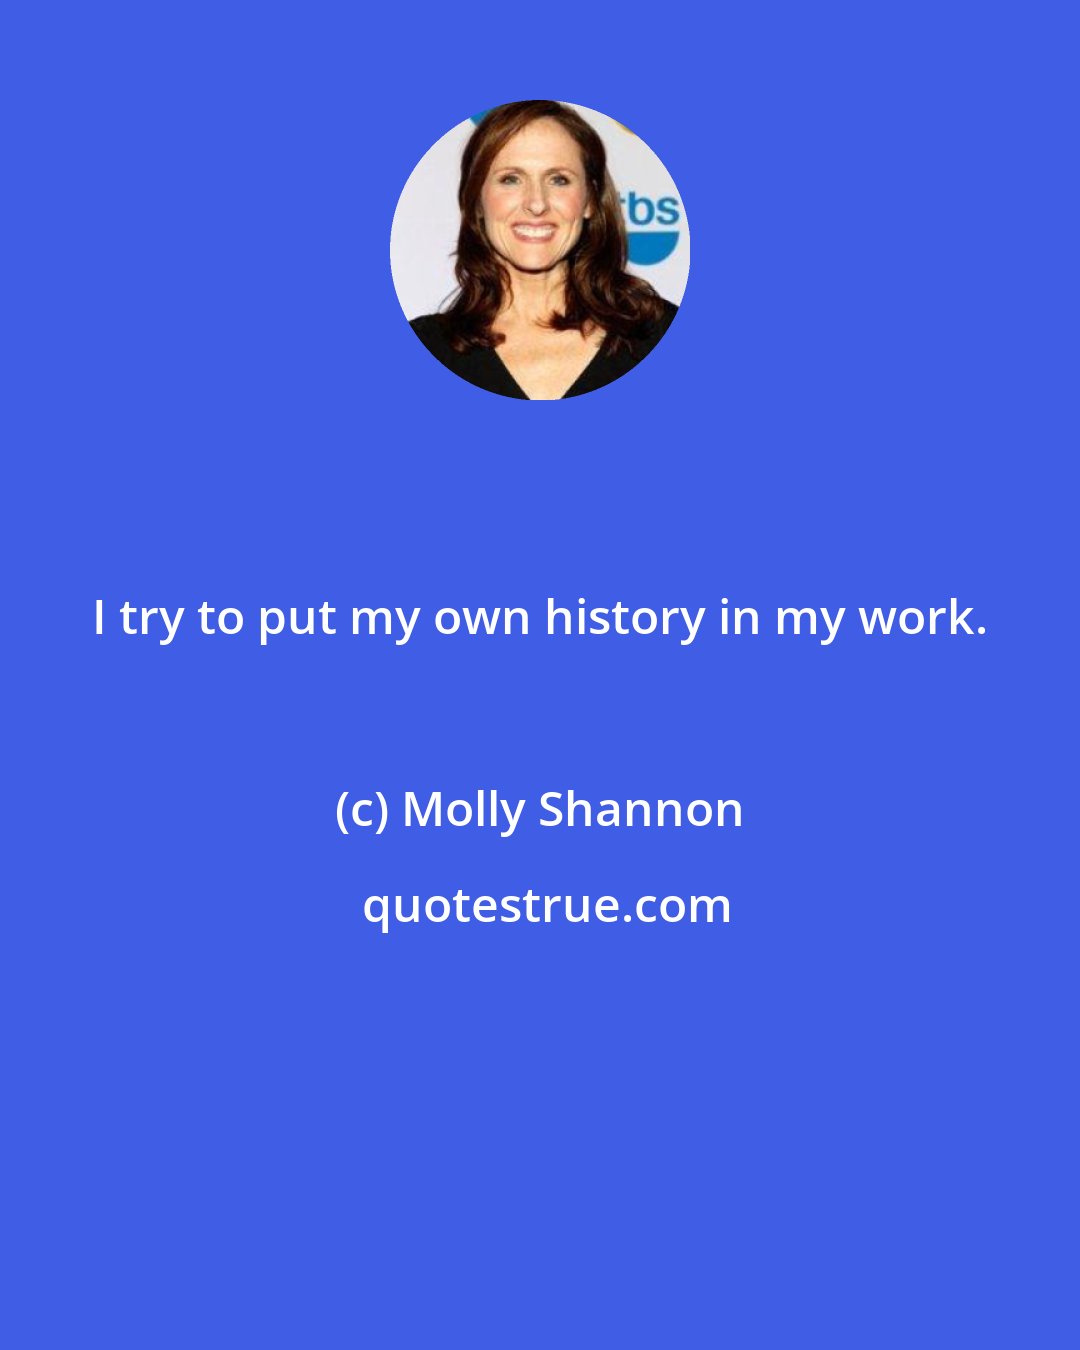 Molly Shannon: I try to put my own history in my work.